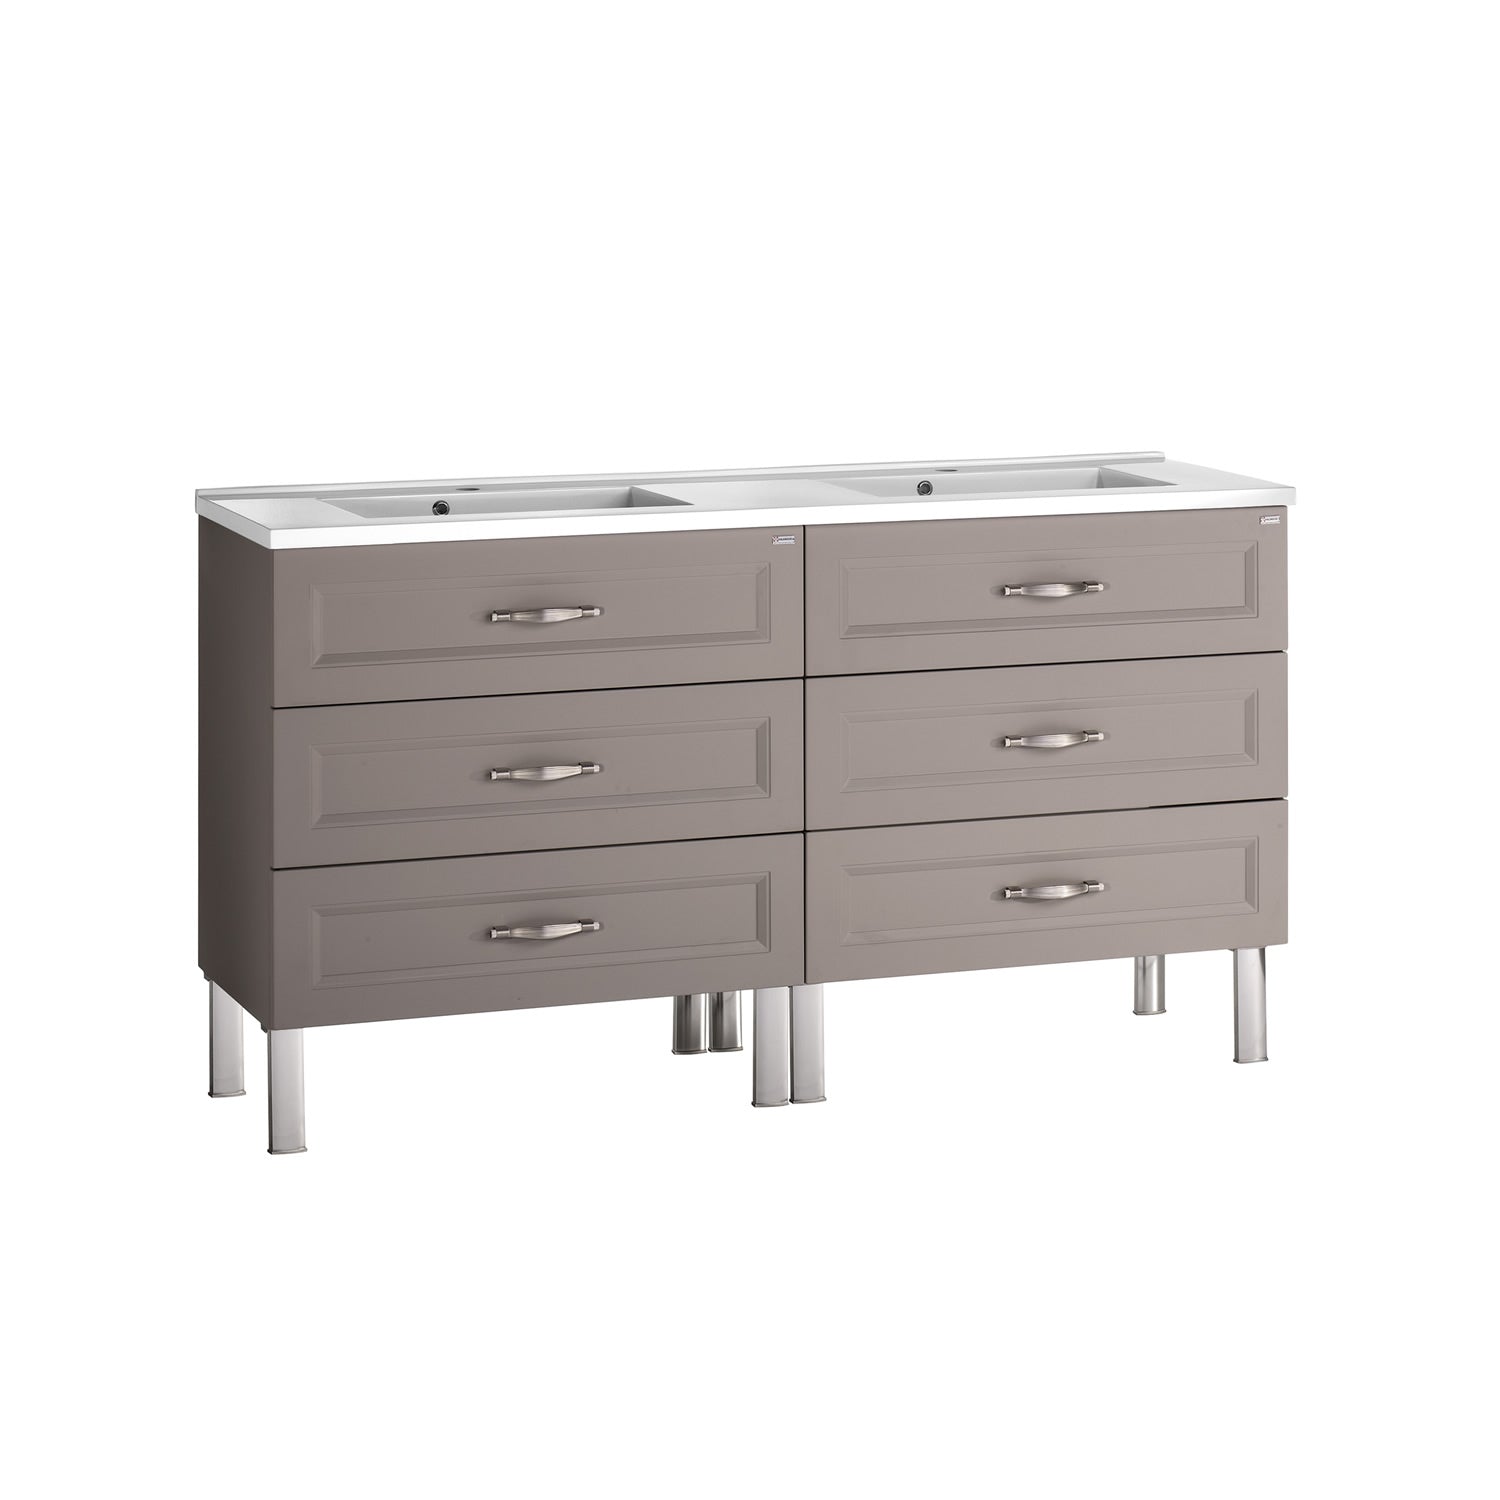 48" Double Vanity, Floor Mount, 6 Drawers with Soft Close, Mink, Serie Class by VALENZUELA